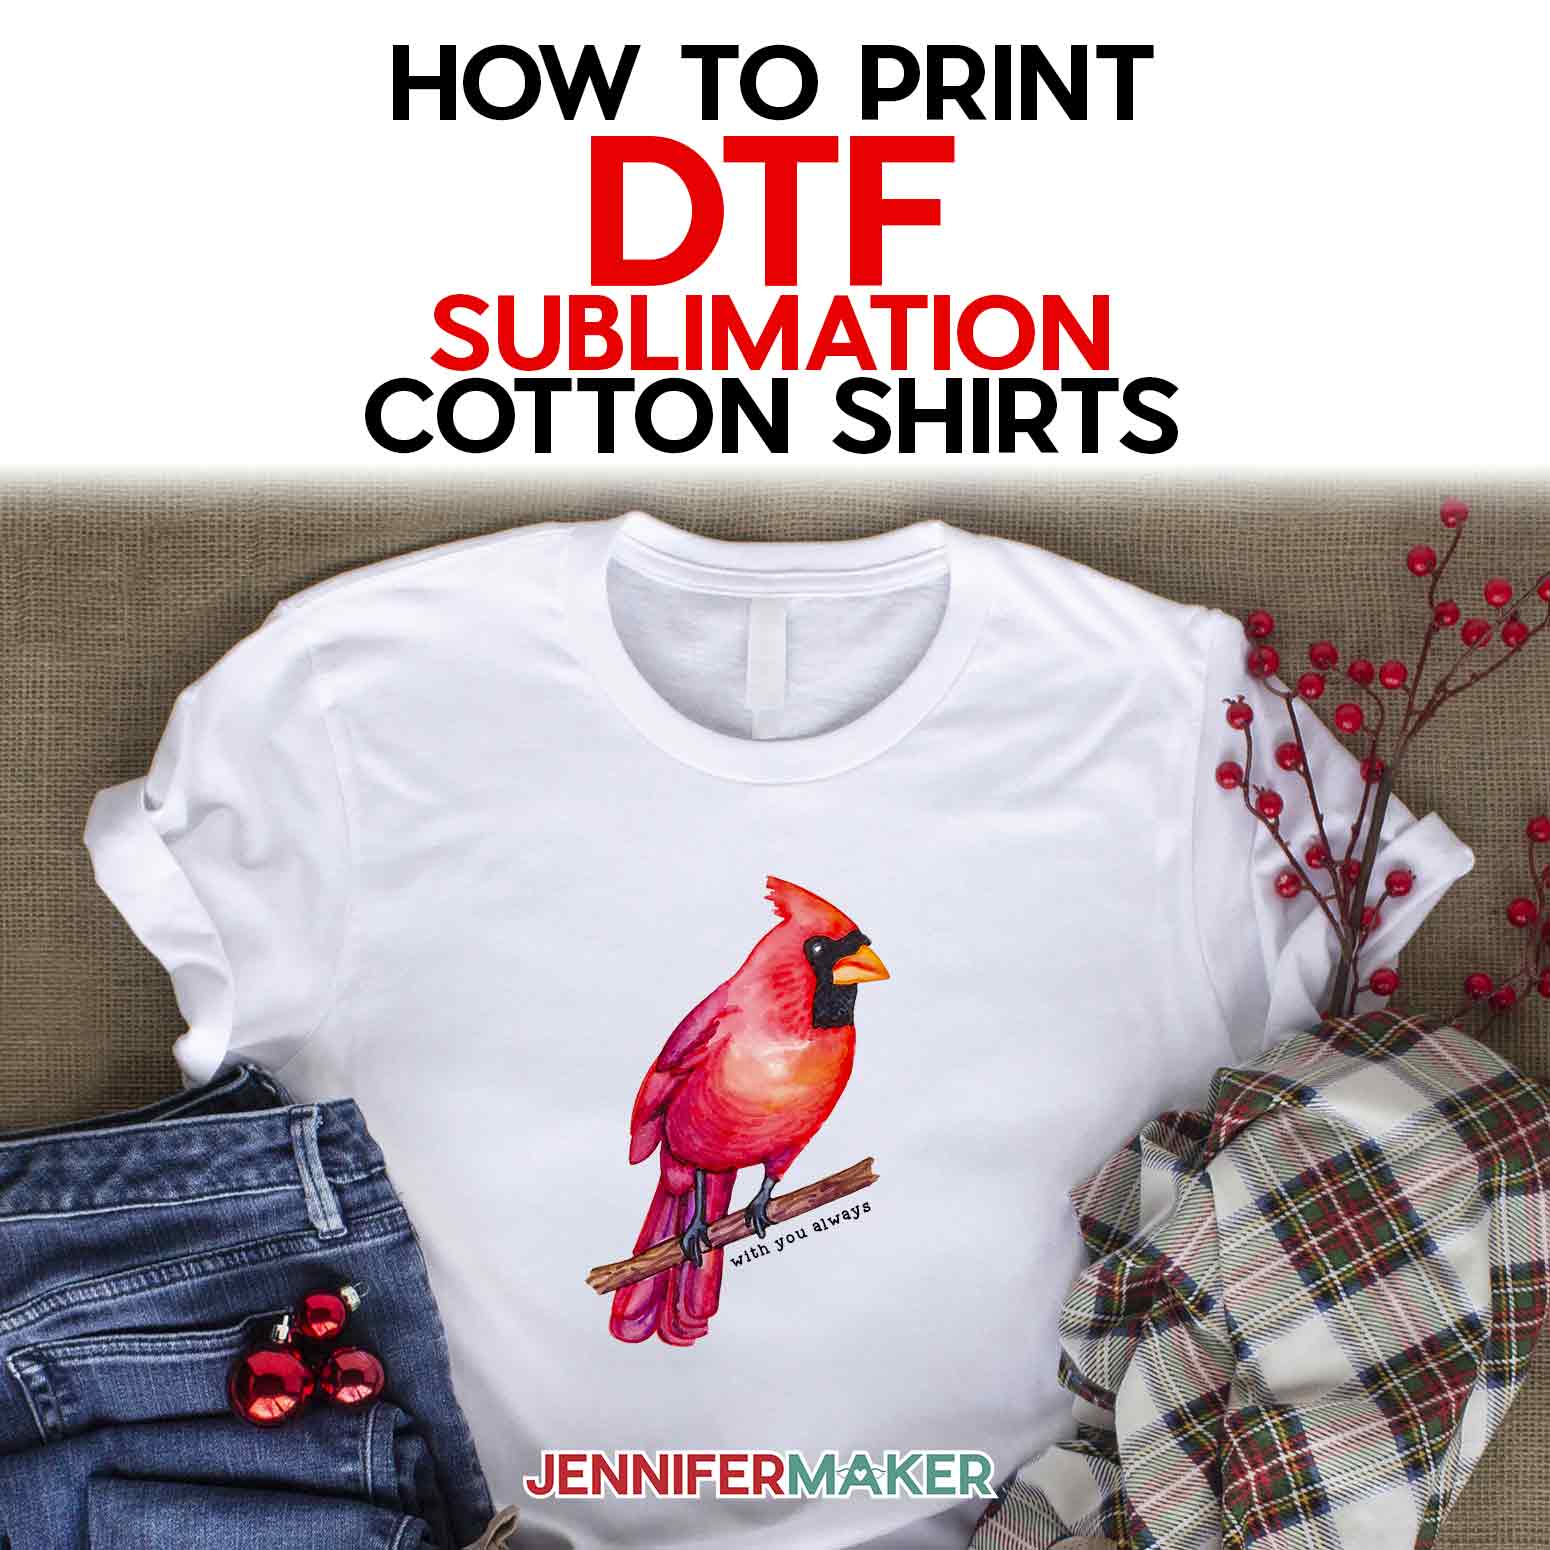 DTF T-Shirt Printing at Home on COTTON: Sublimation Print Hack!